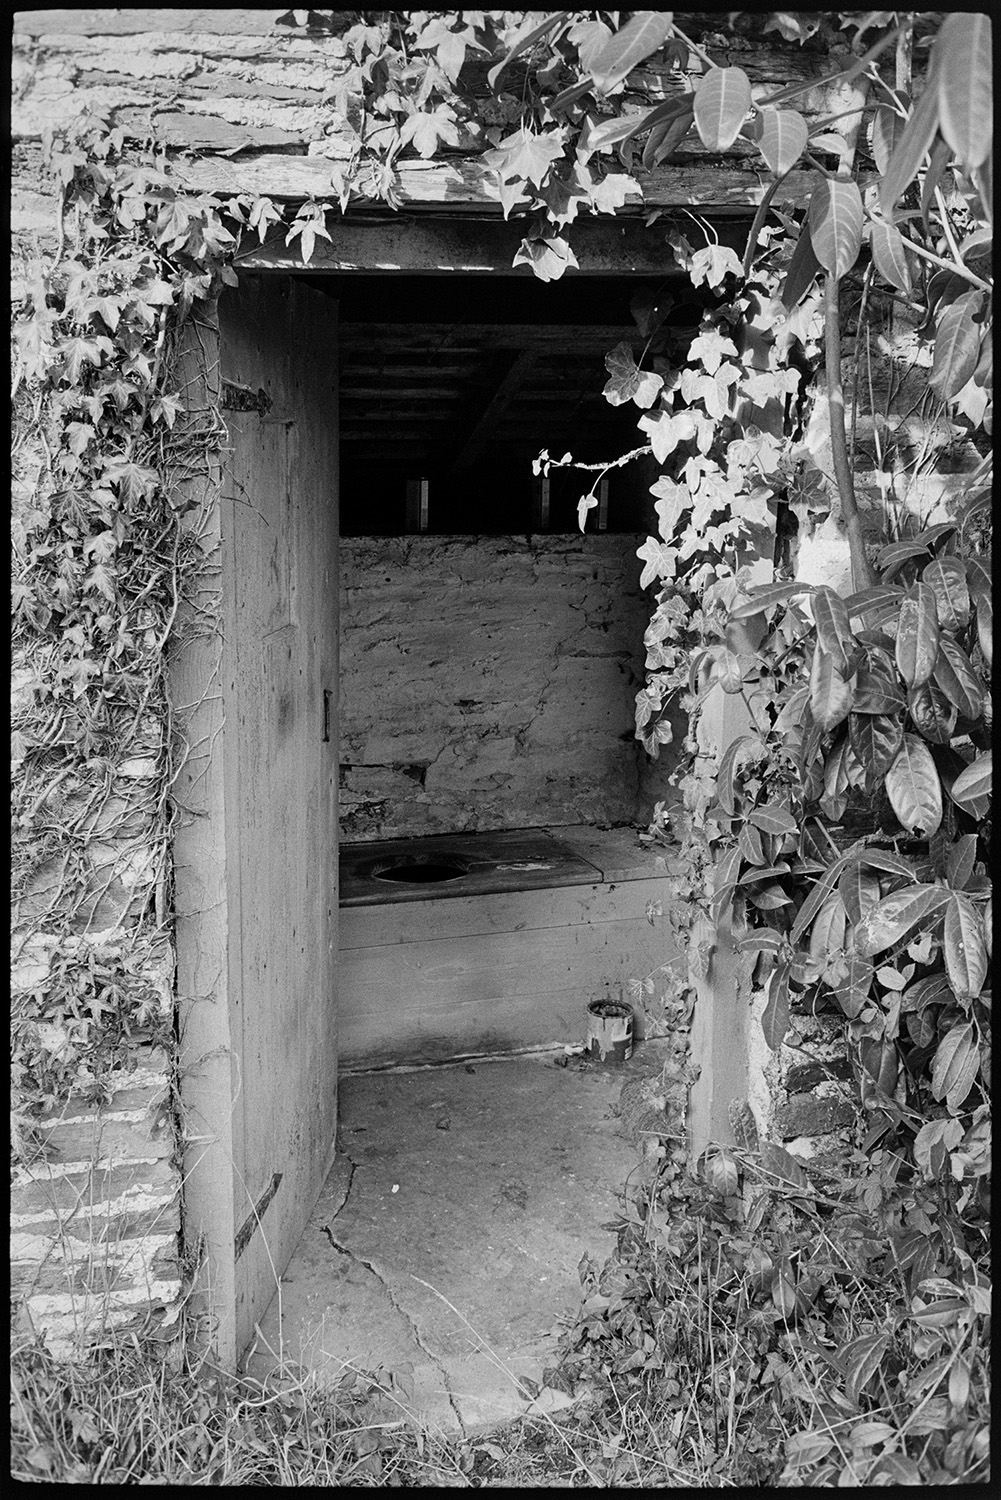 Entrance to outside lavatory toilet, showing wooden seat, ivy round door. 
[The open entrance to an outside toilet at Bottreaux Mill, Molland, The wooden toilet seat is visible through the open doorway which is surrounded by ivy.]